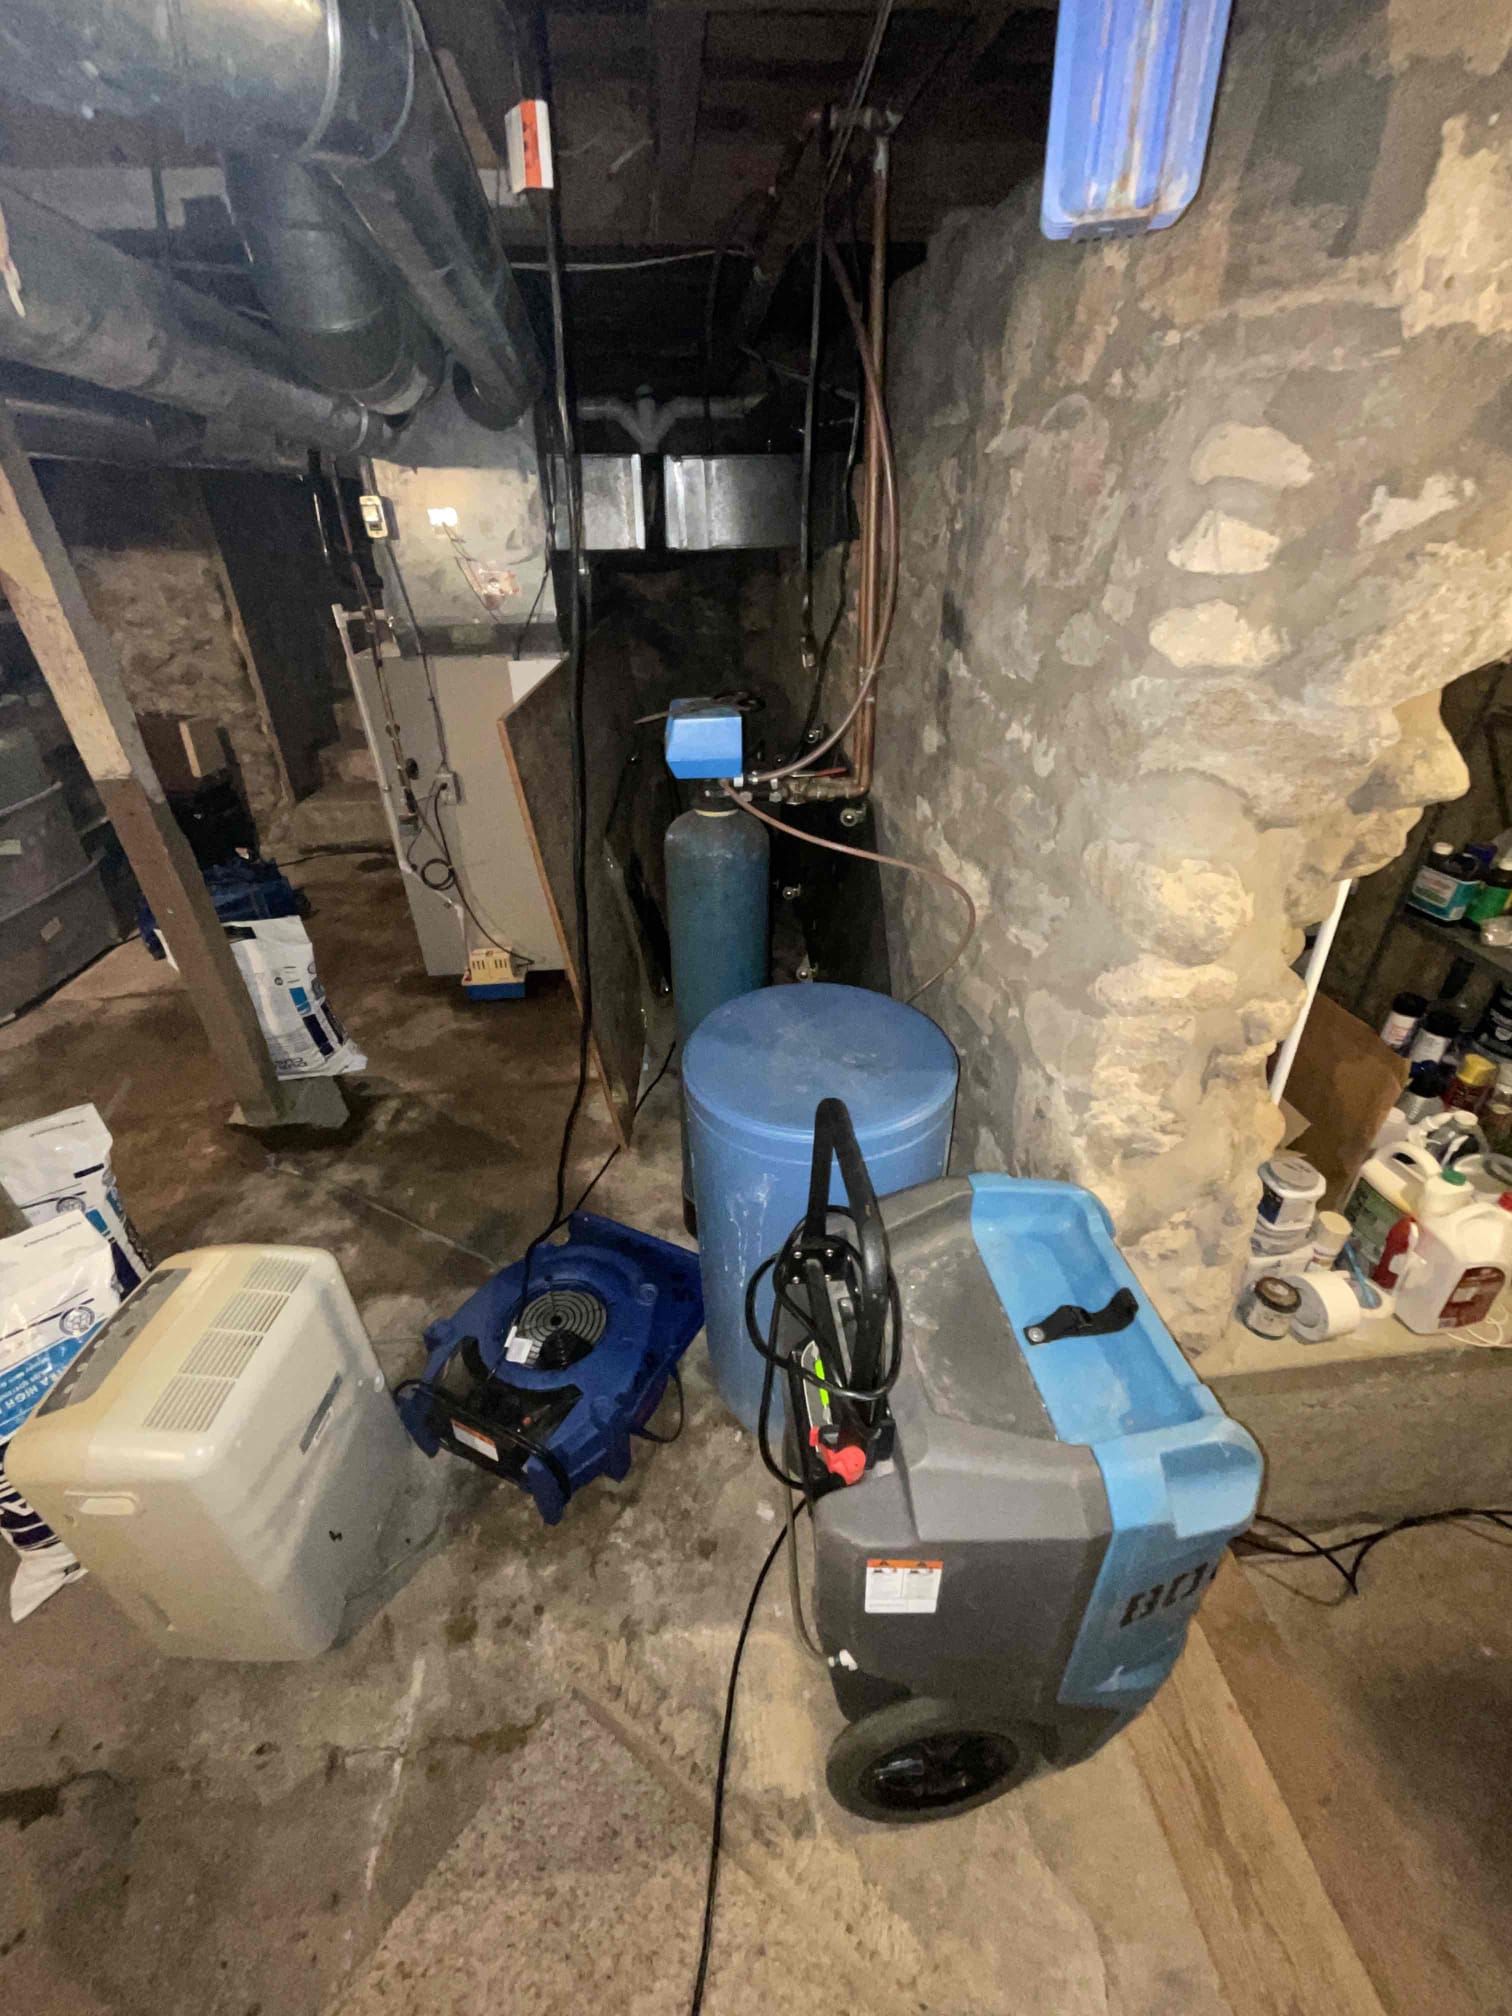 Drying equipment set up to properly dry basement